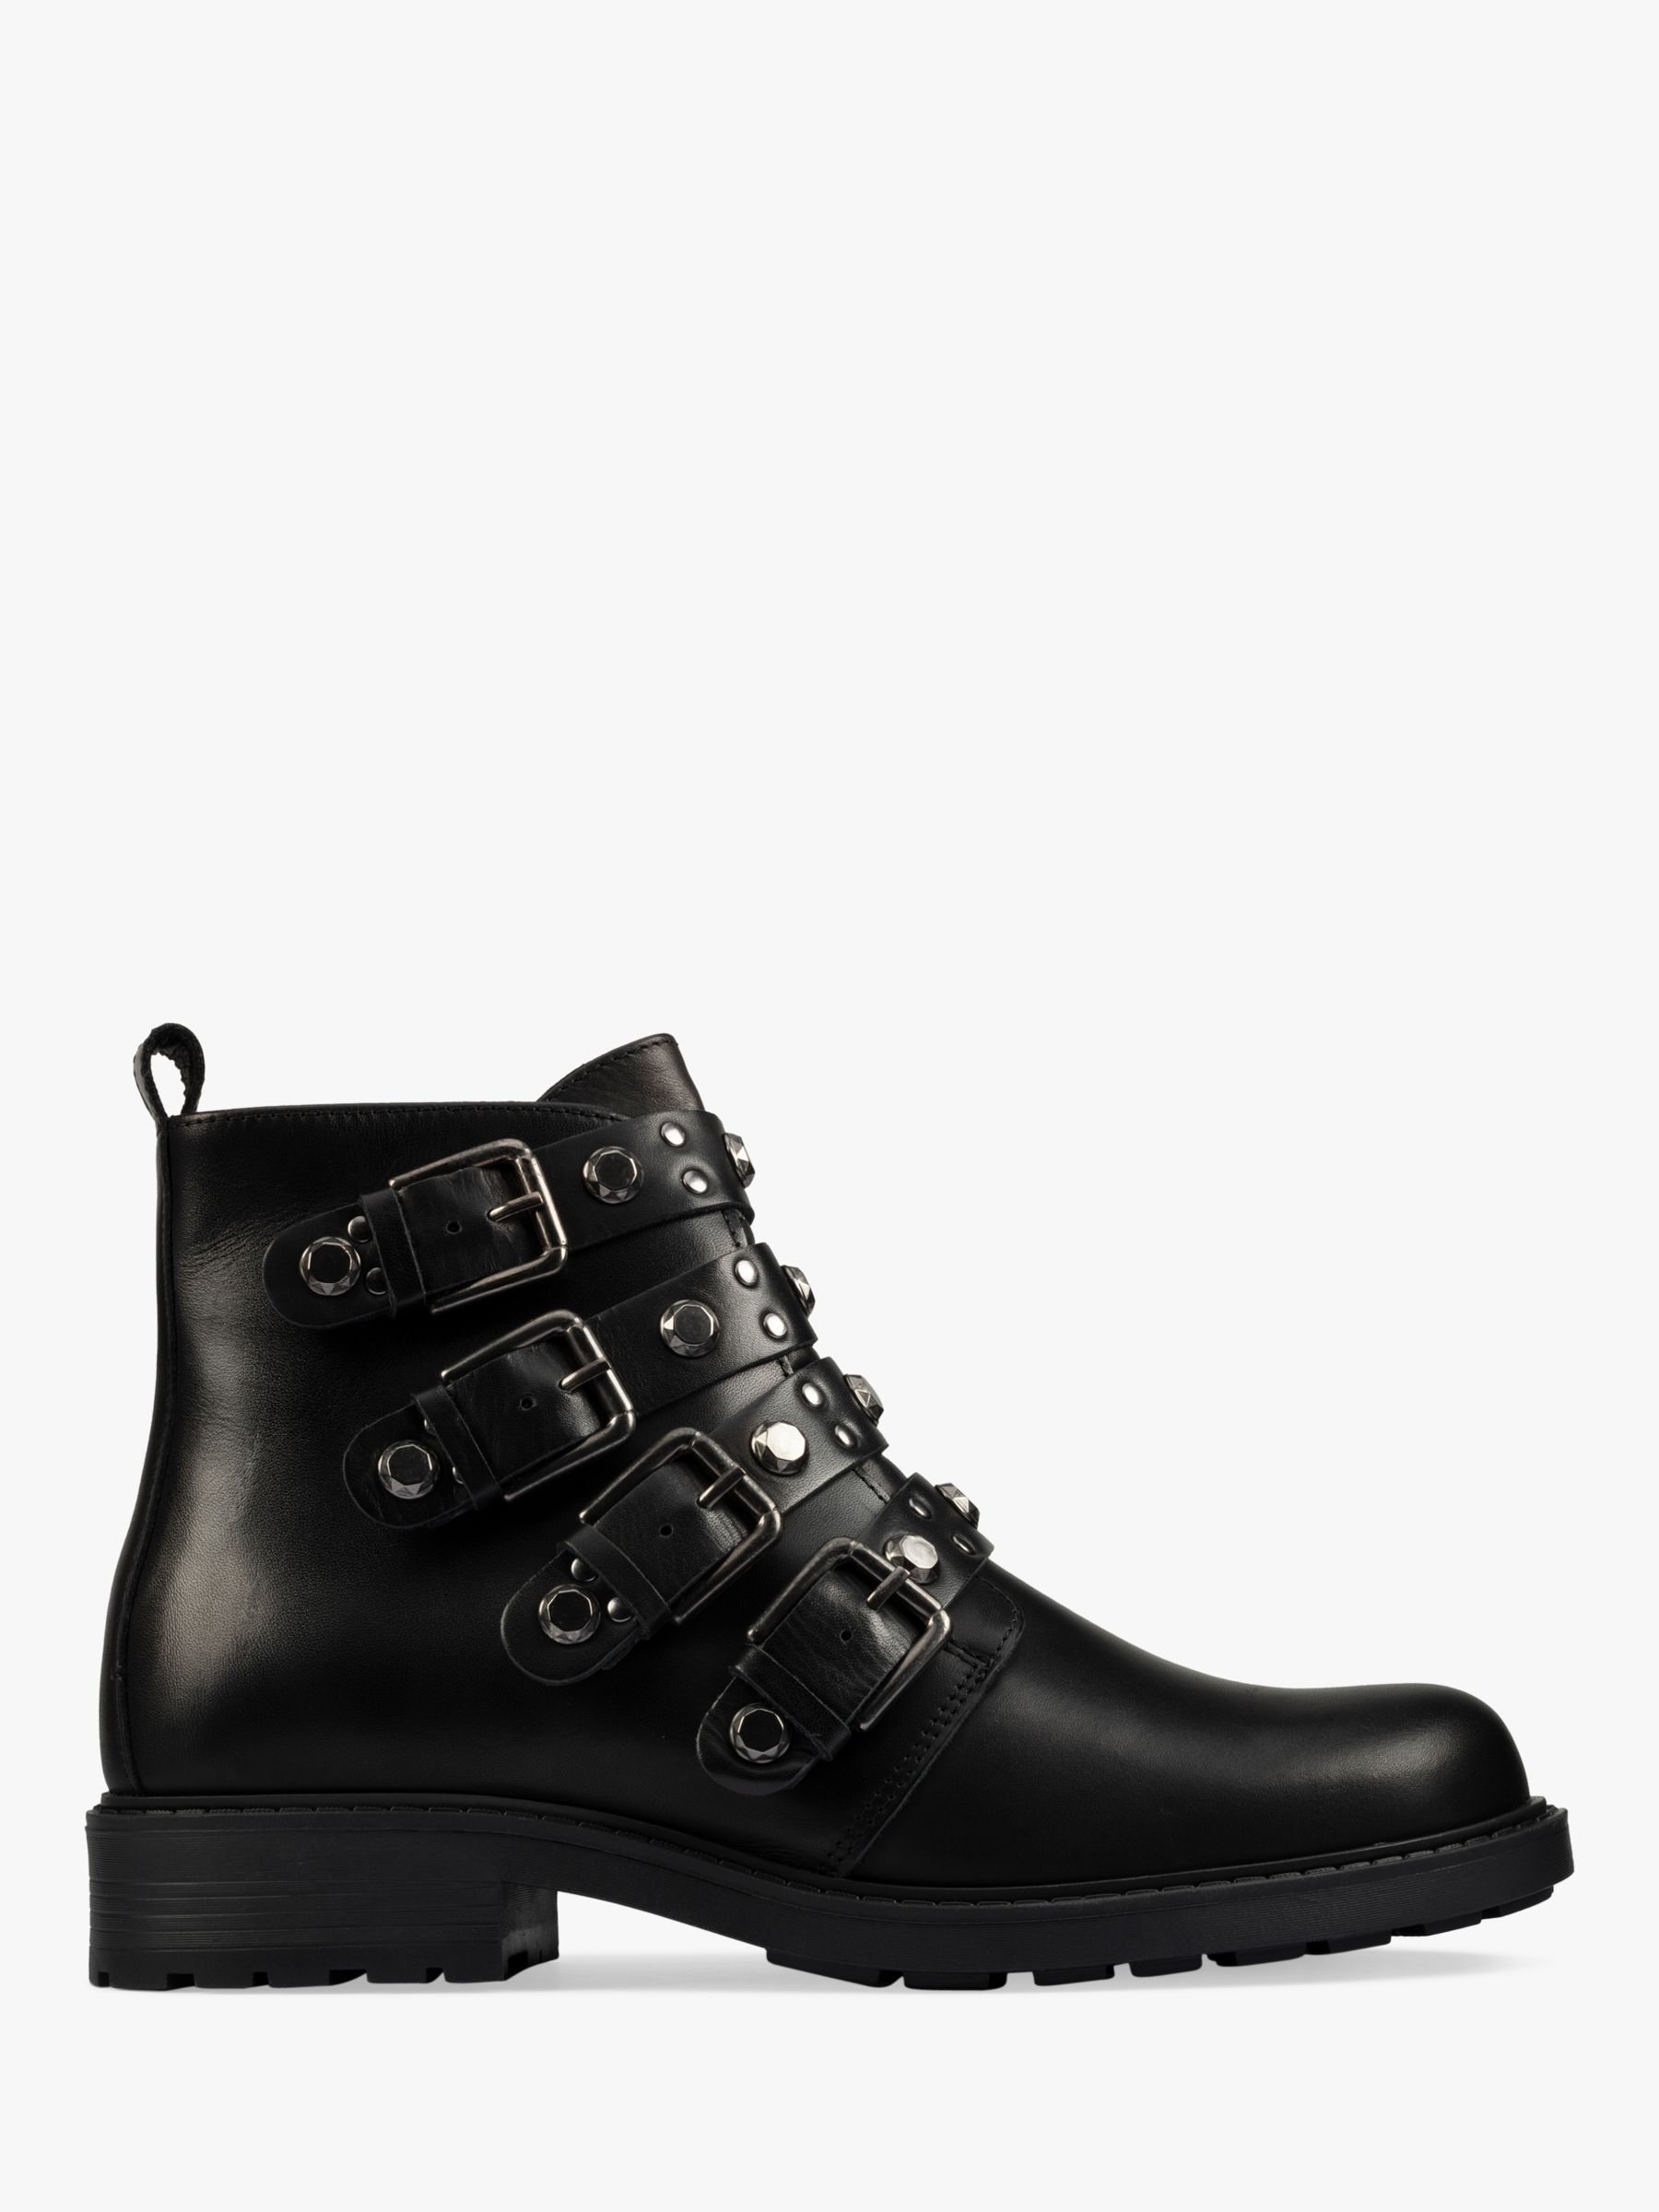 Clarks Orinoco 2 Leather Buckle Ankle Boots, Black at John Lewis & Partners